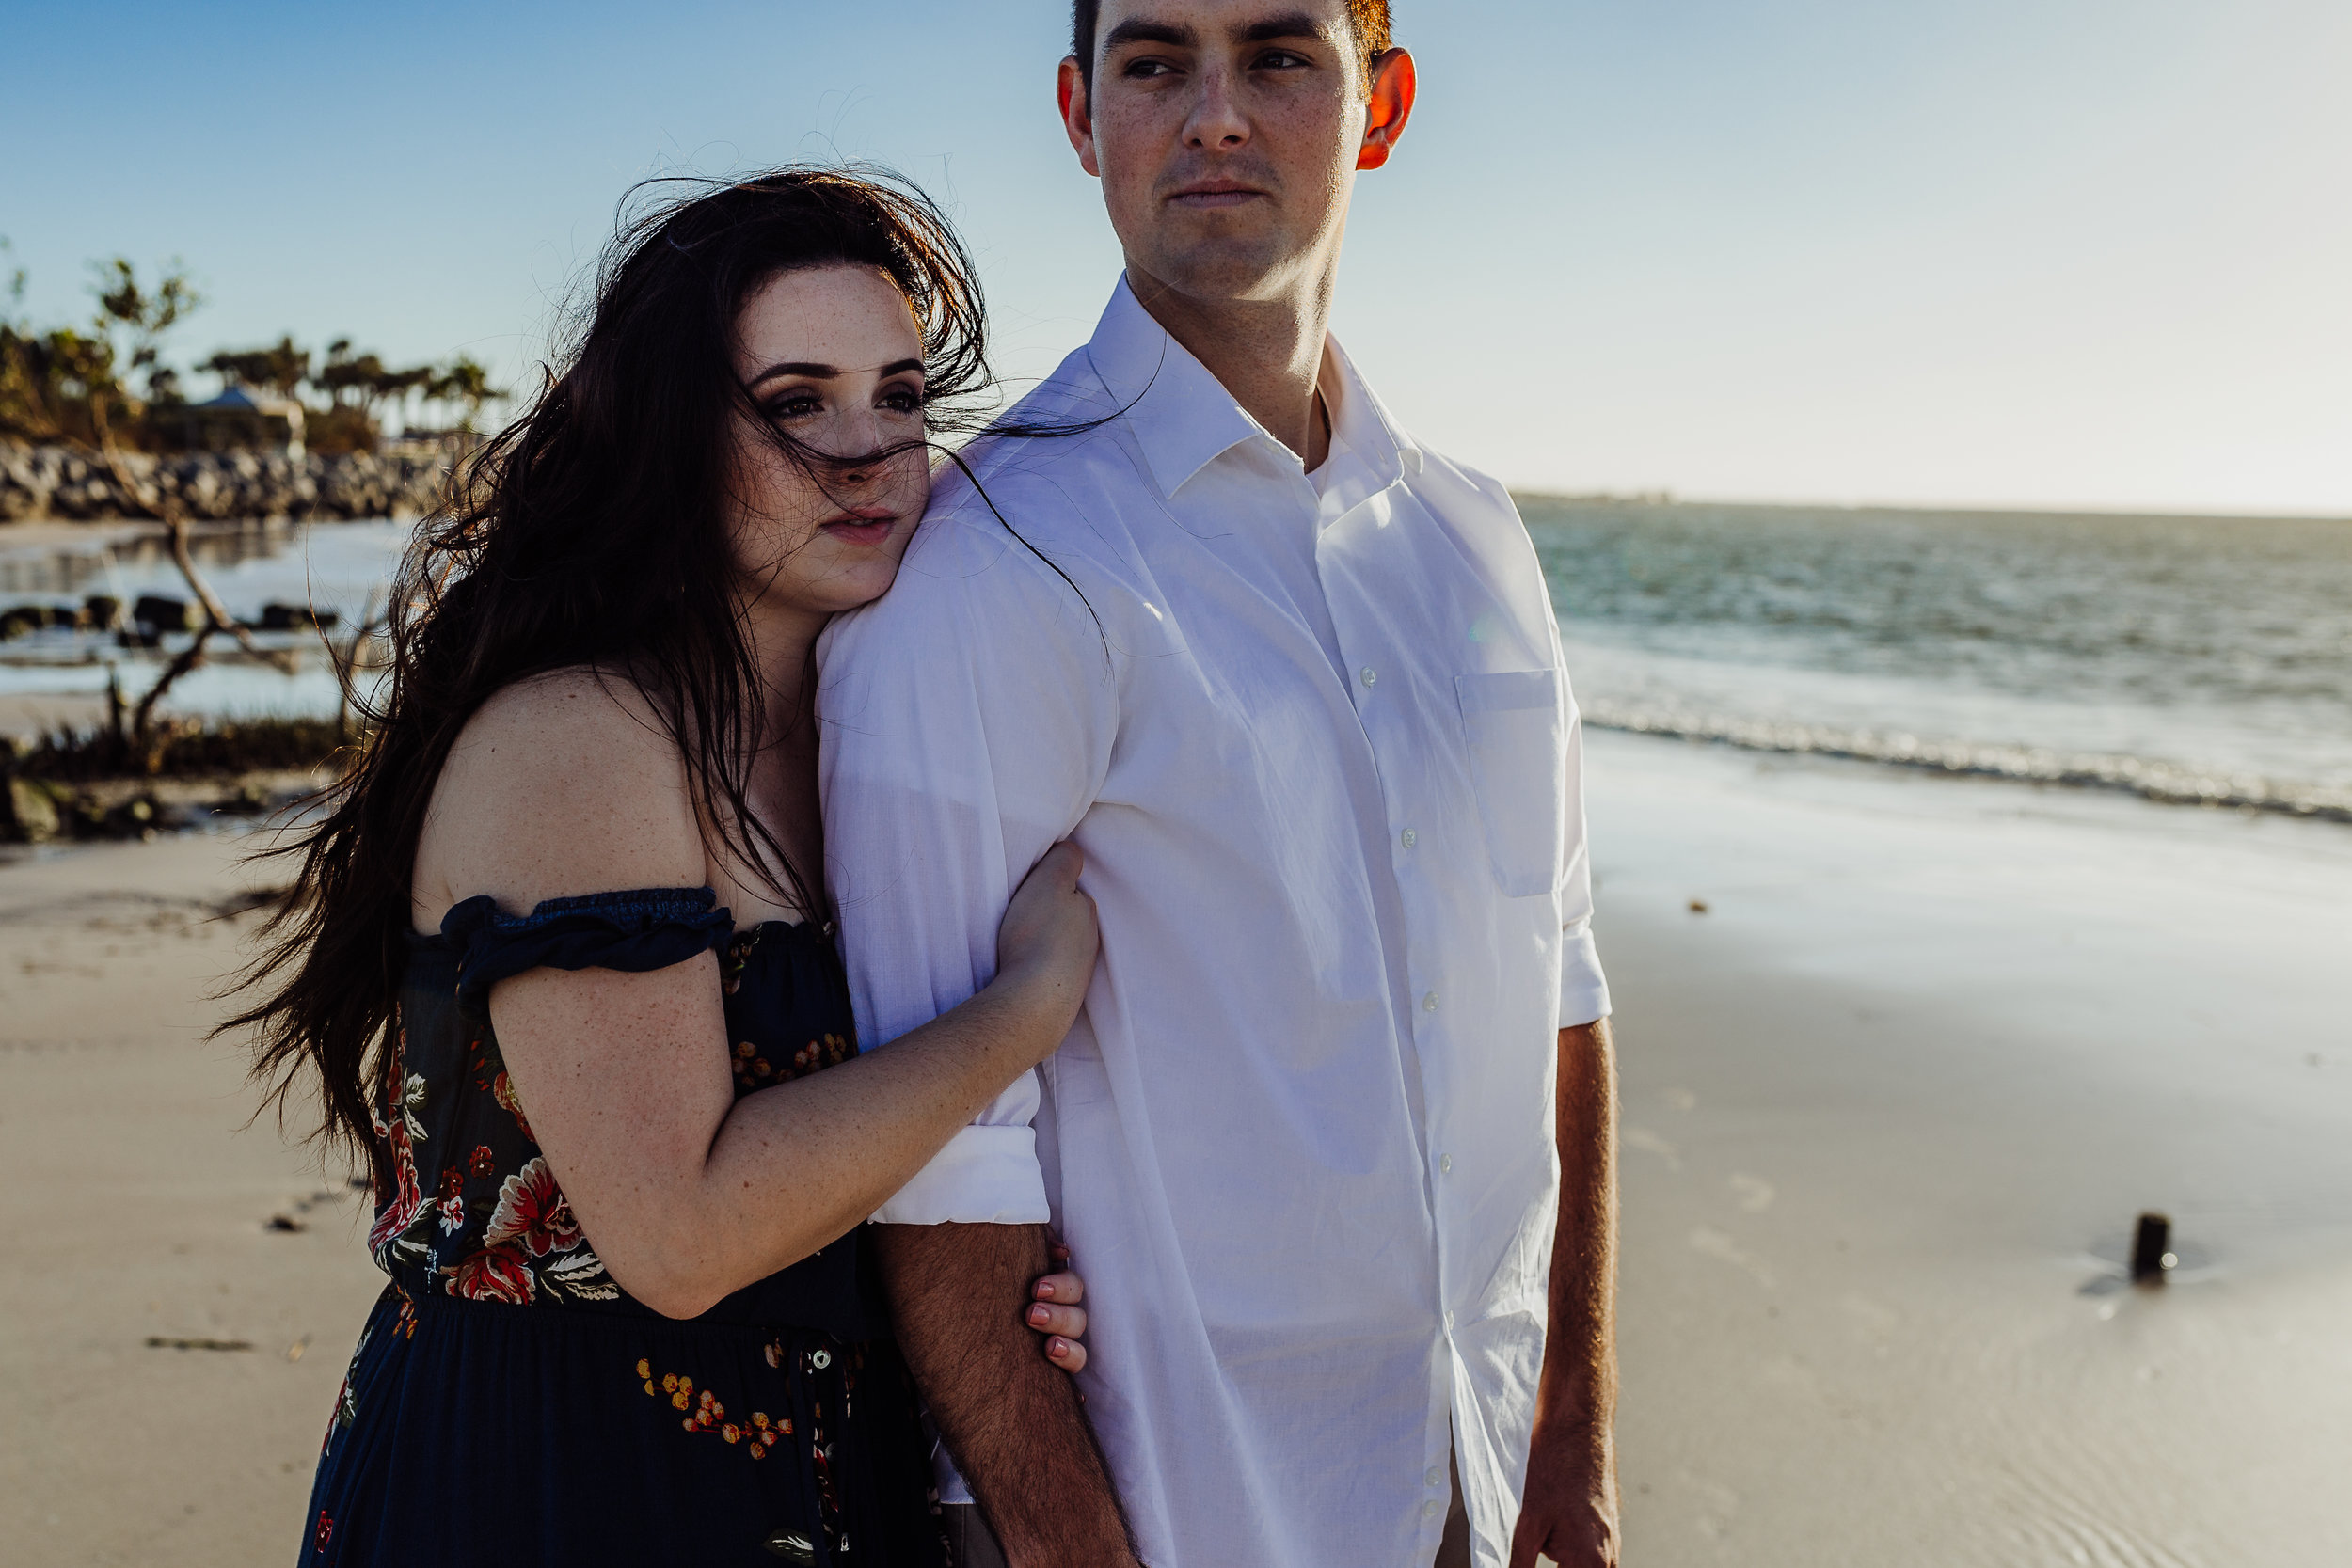 Daytona Beach engagement photographer shot in Ponce Inlet, Fl styled with a floral Sophie and Trey maxi dress